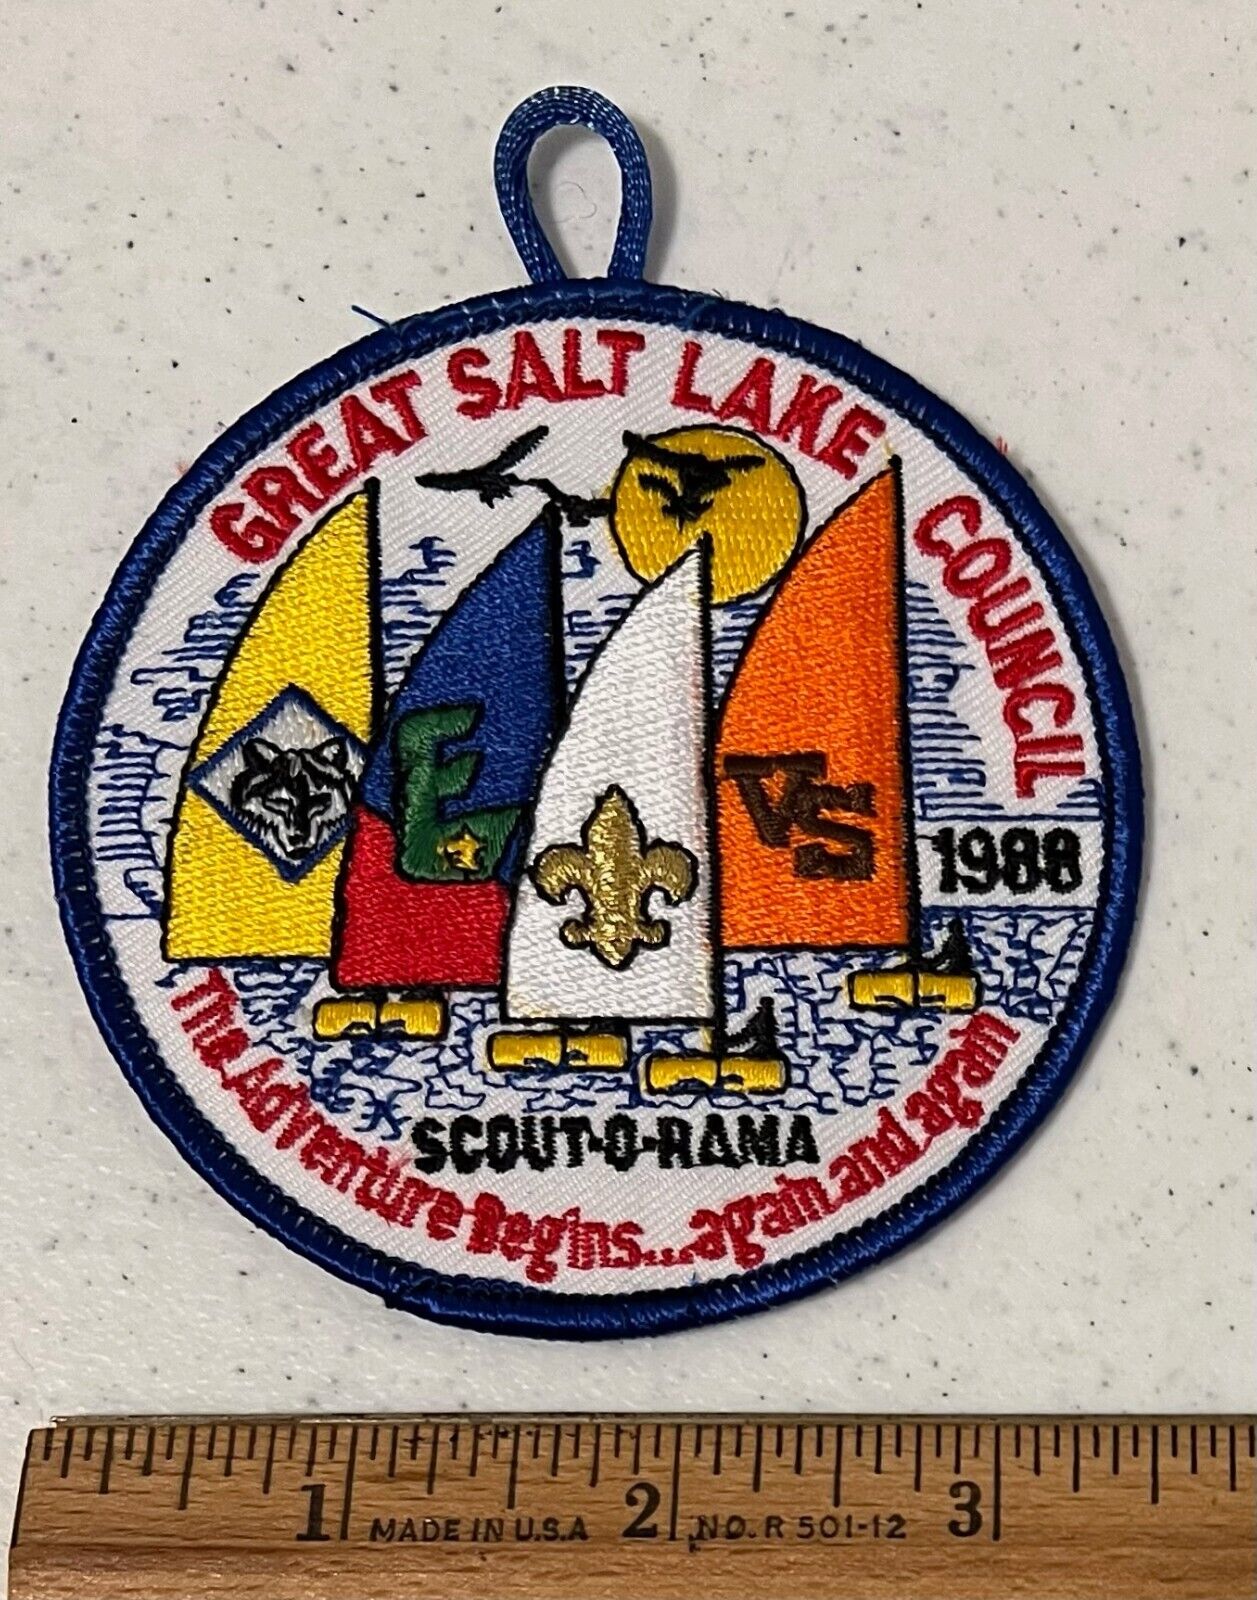 1988 Scout-O-Rama The Adventure Begins Great Salt Lake Council Boy Scout Patch